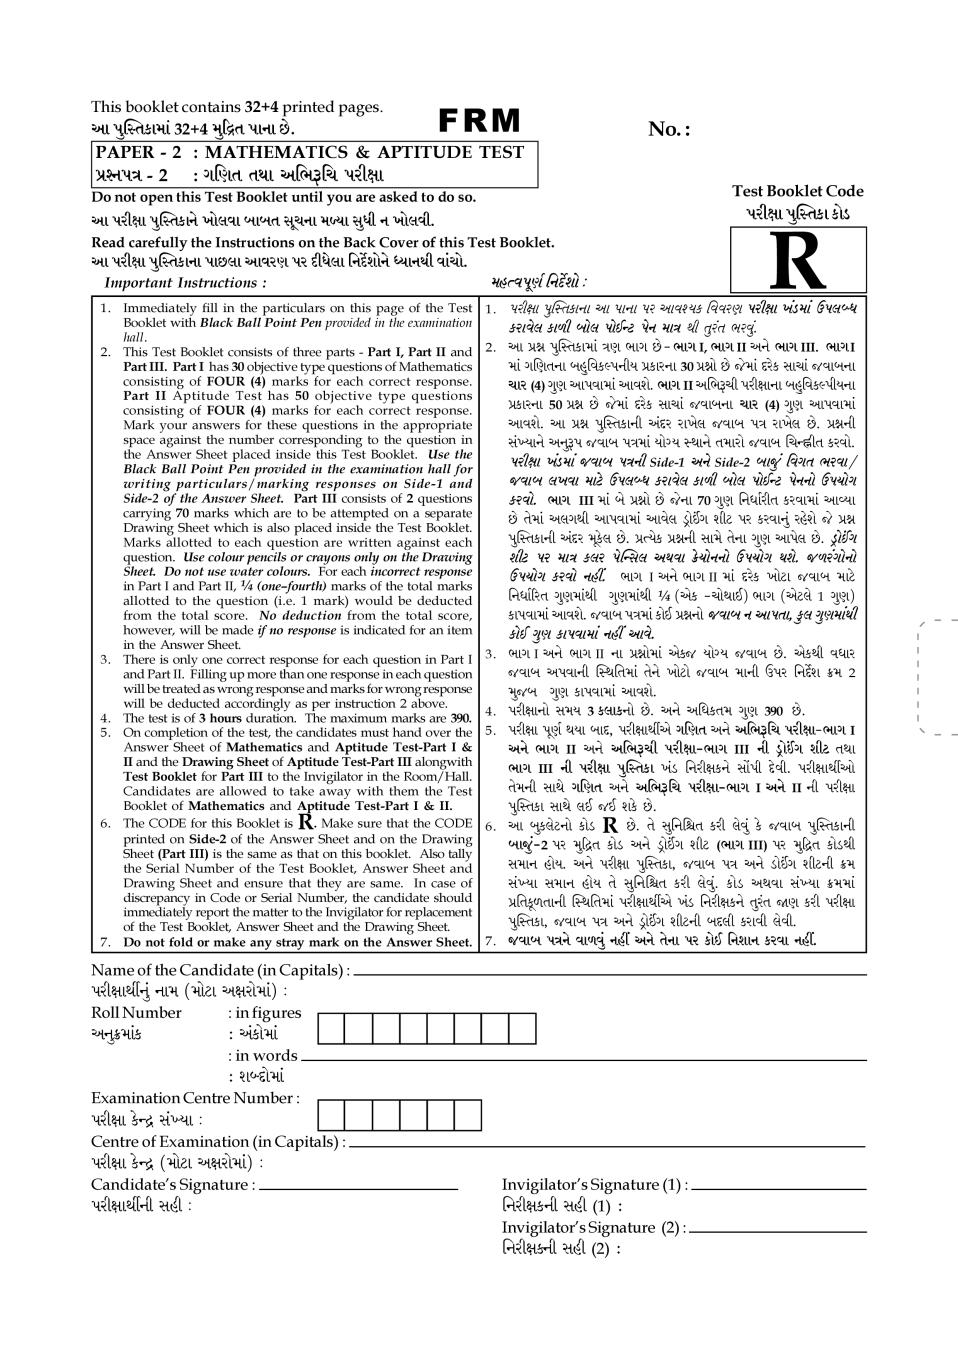 JEE Main 2018 Question Paper for B.Arch (Paper 2) in Gujarati - Page 1